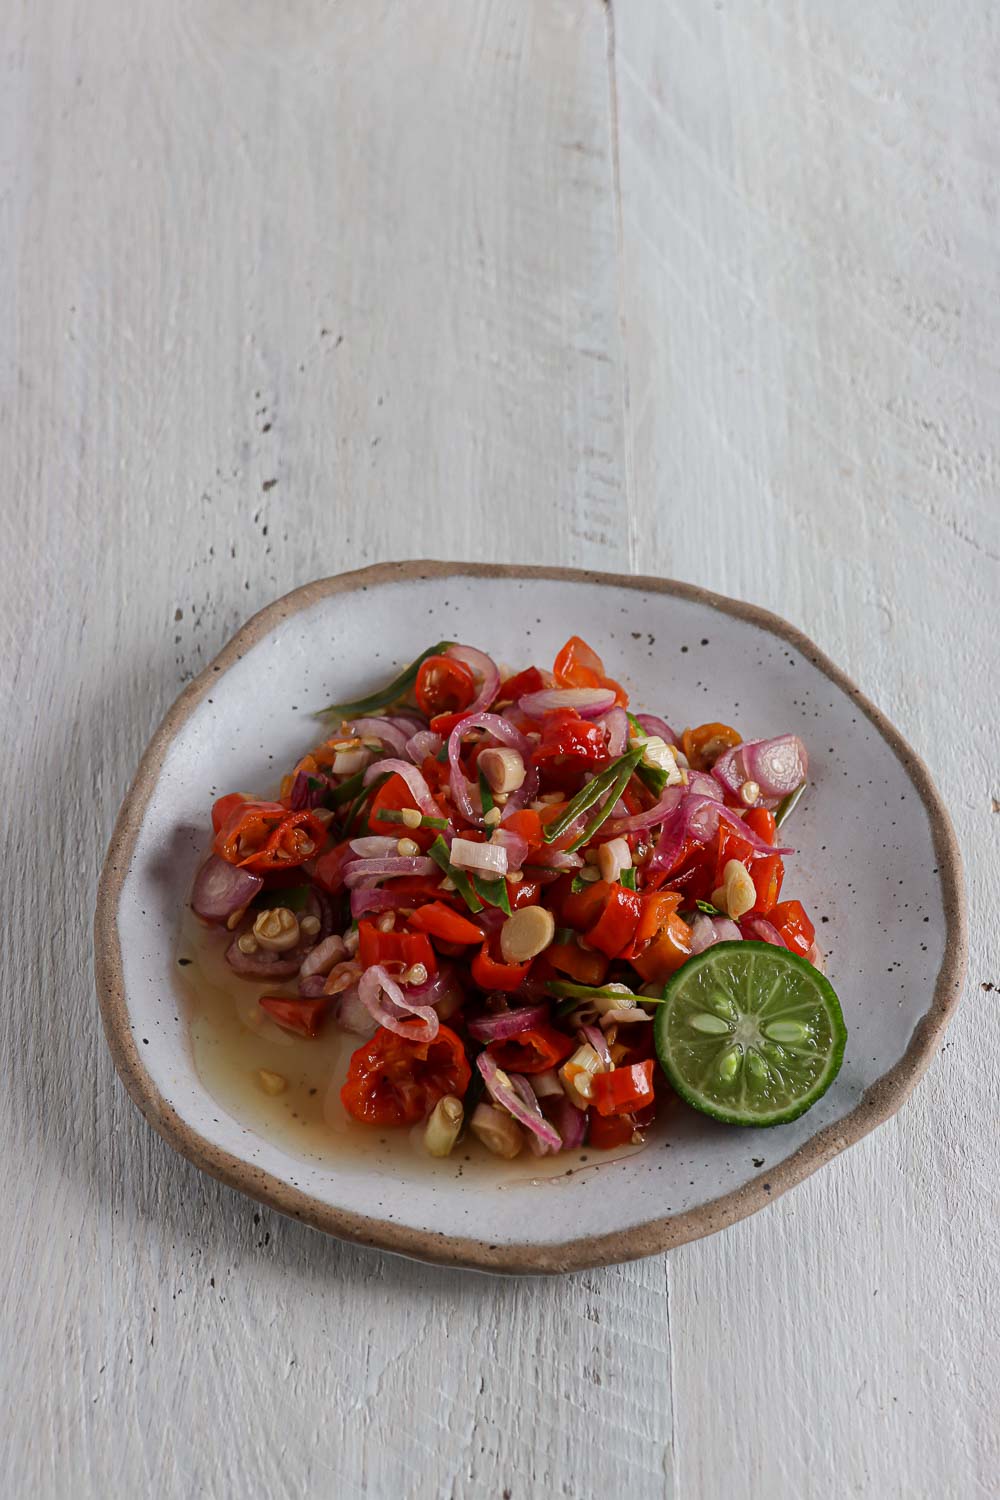 Learn the easy way to make Balinese sambal matah or raw Balinese shallot and lemongrass relish at home. Healthy, simple, and flavorful.